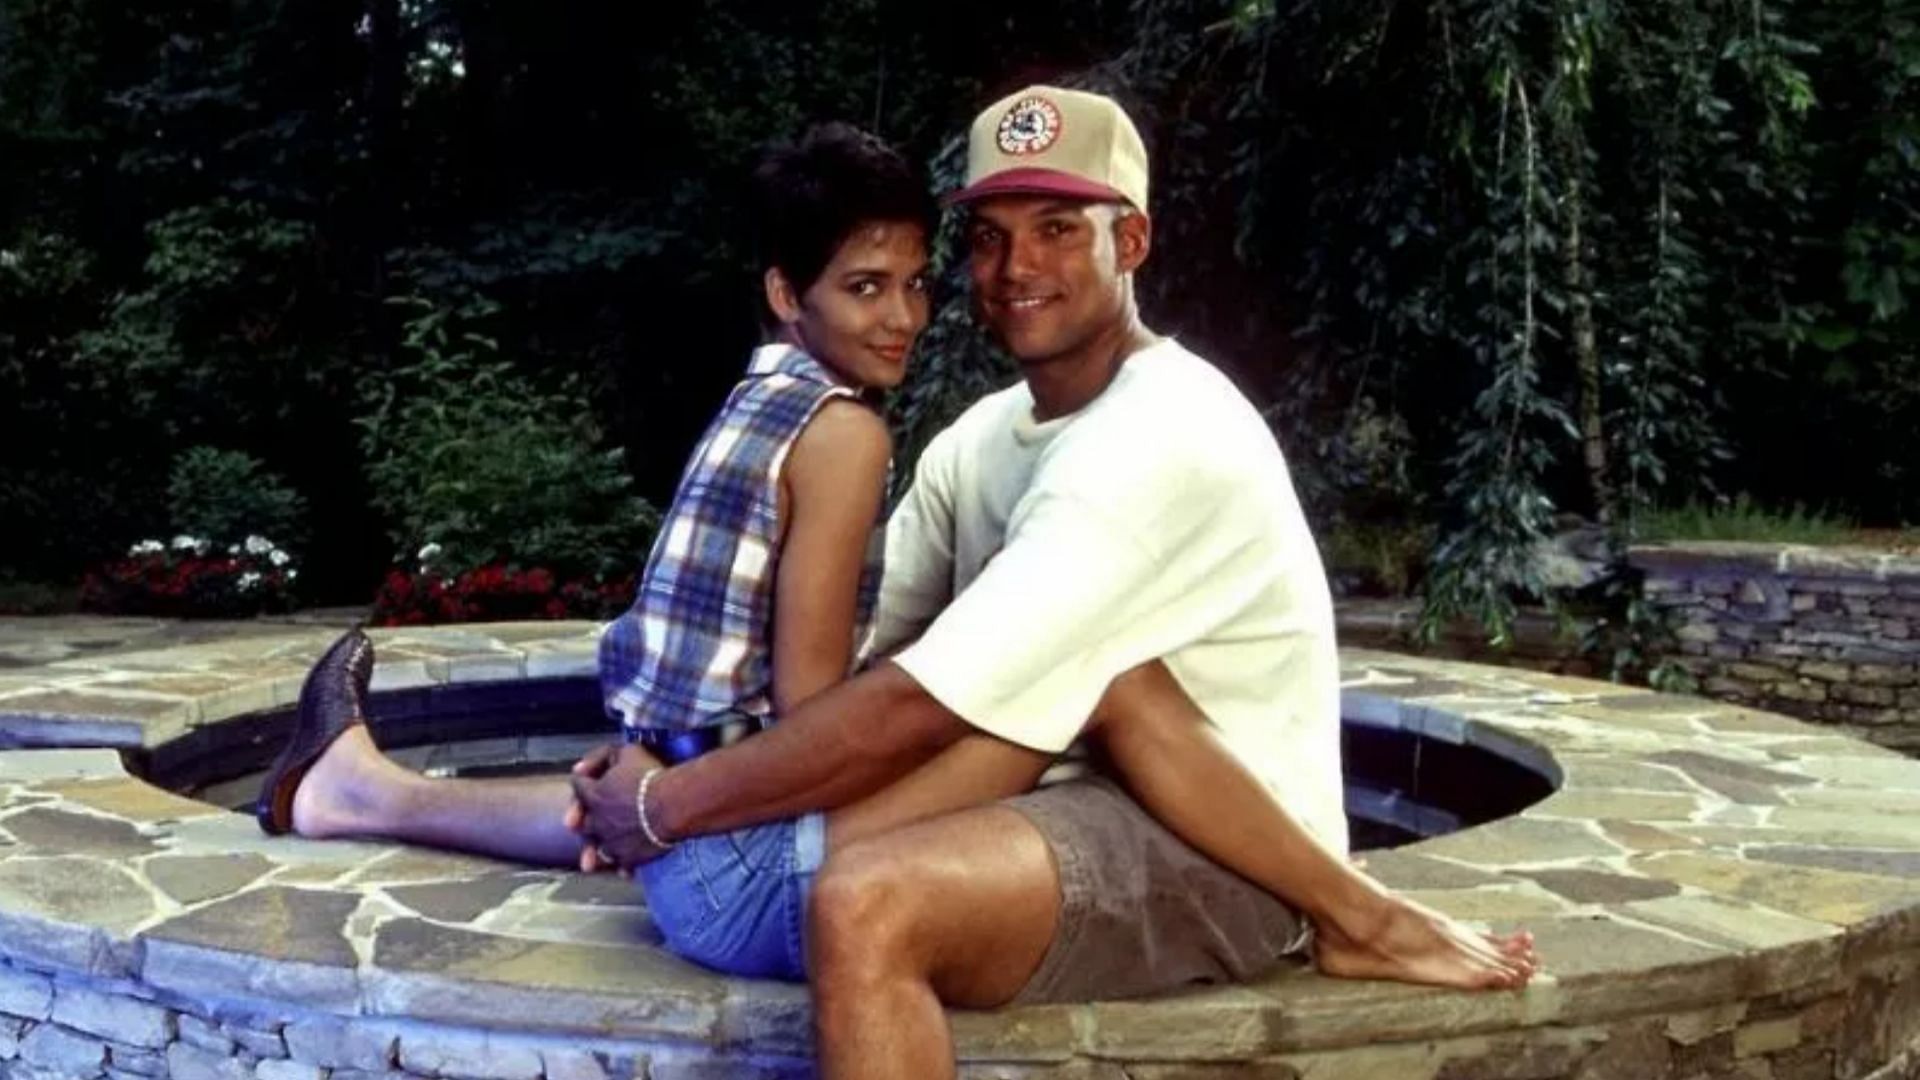 Halle Berry with David Justice during their marriage.